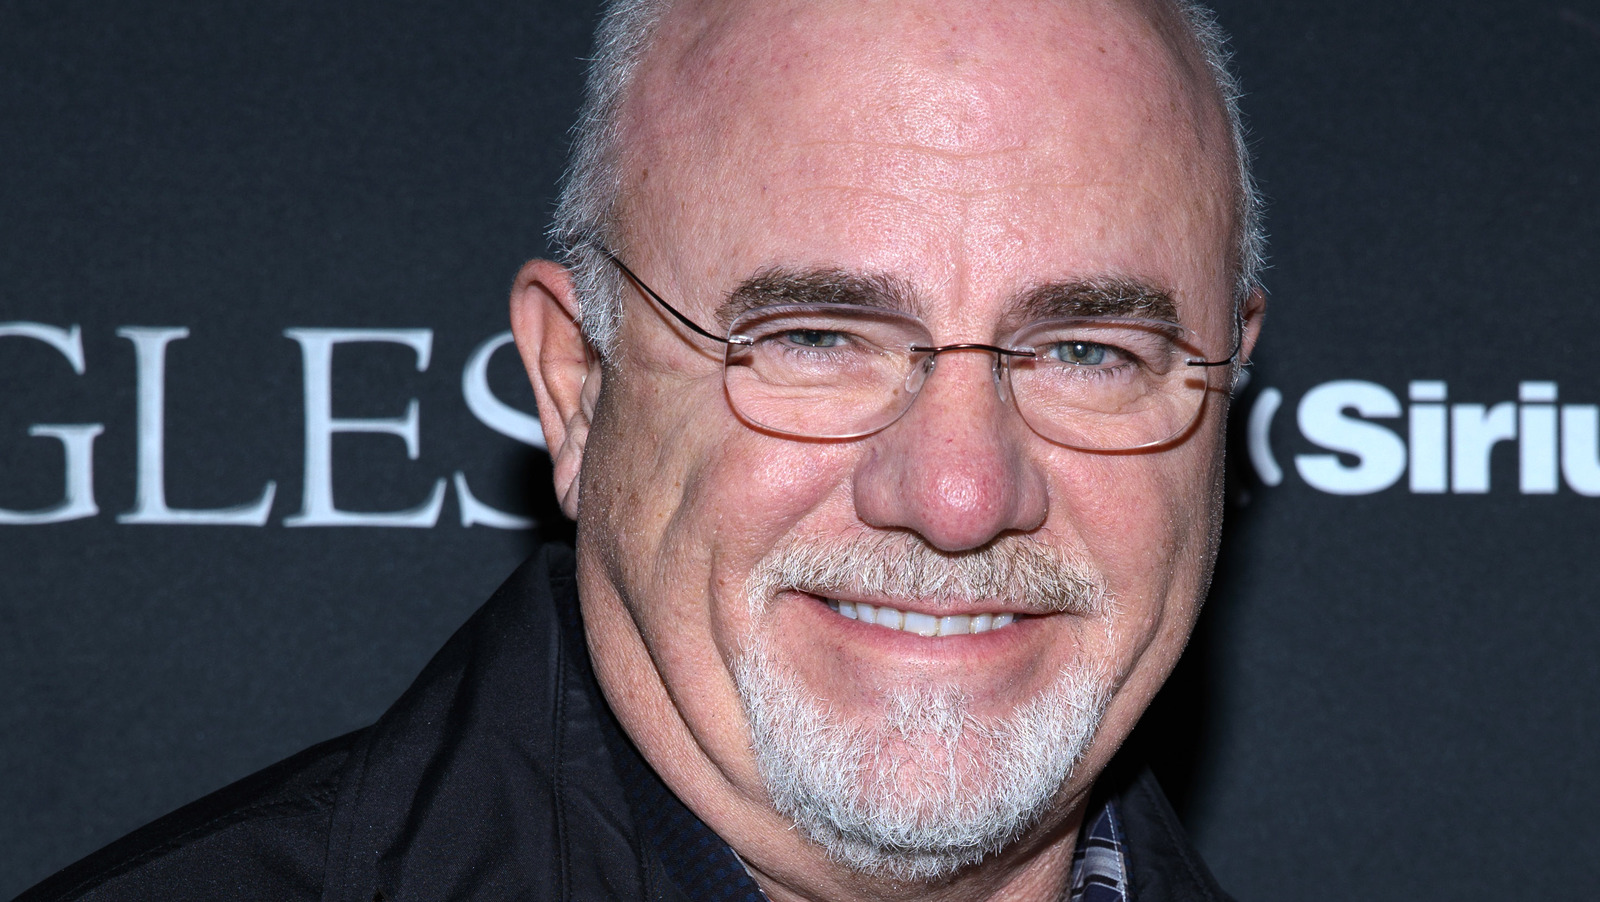 how rich is dave ramsey